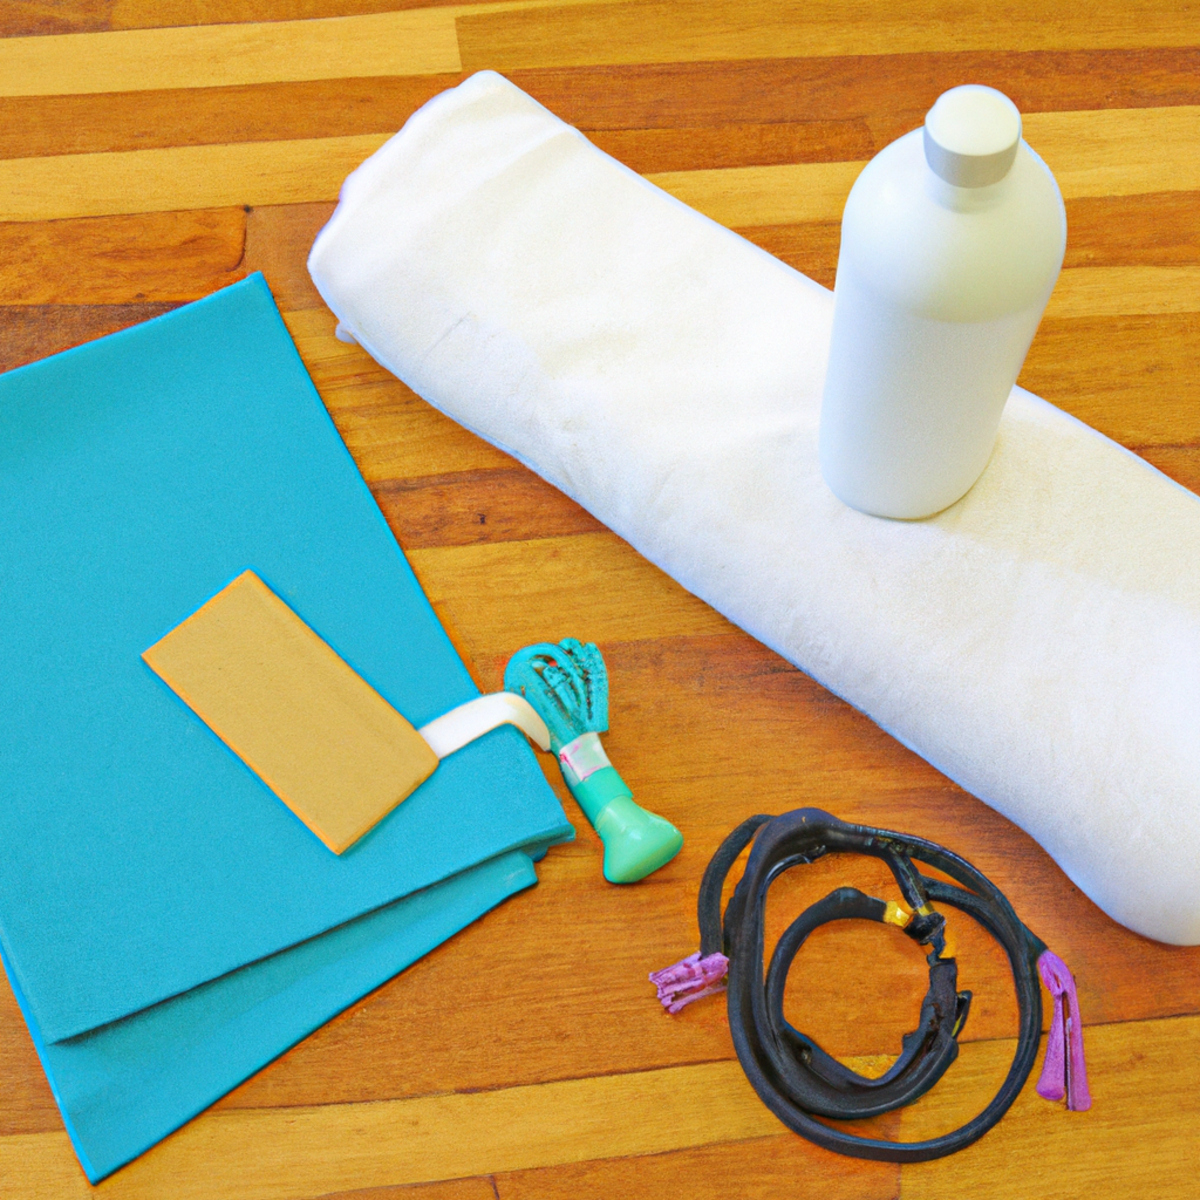 The photo captures a serene scene of a yoga mat laid out on a wooden floor, surrounded by various objects that enhance the practice. A foam block and a strap are placed on the mat, ready to assist in stretches and poses. A water bottle and a towel sit nearby, reminding the practitioner to stay hydrated and comfortable. In the background, a large window lets in natural light, creating a peaceful and calming atmosphere. The simplicity of the objects in the photo highlights the focus on the mind-body connection that yoga and Pilates promote.